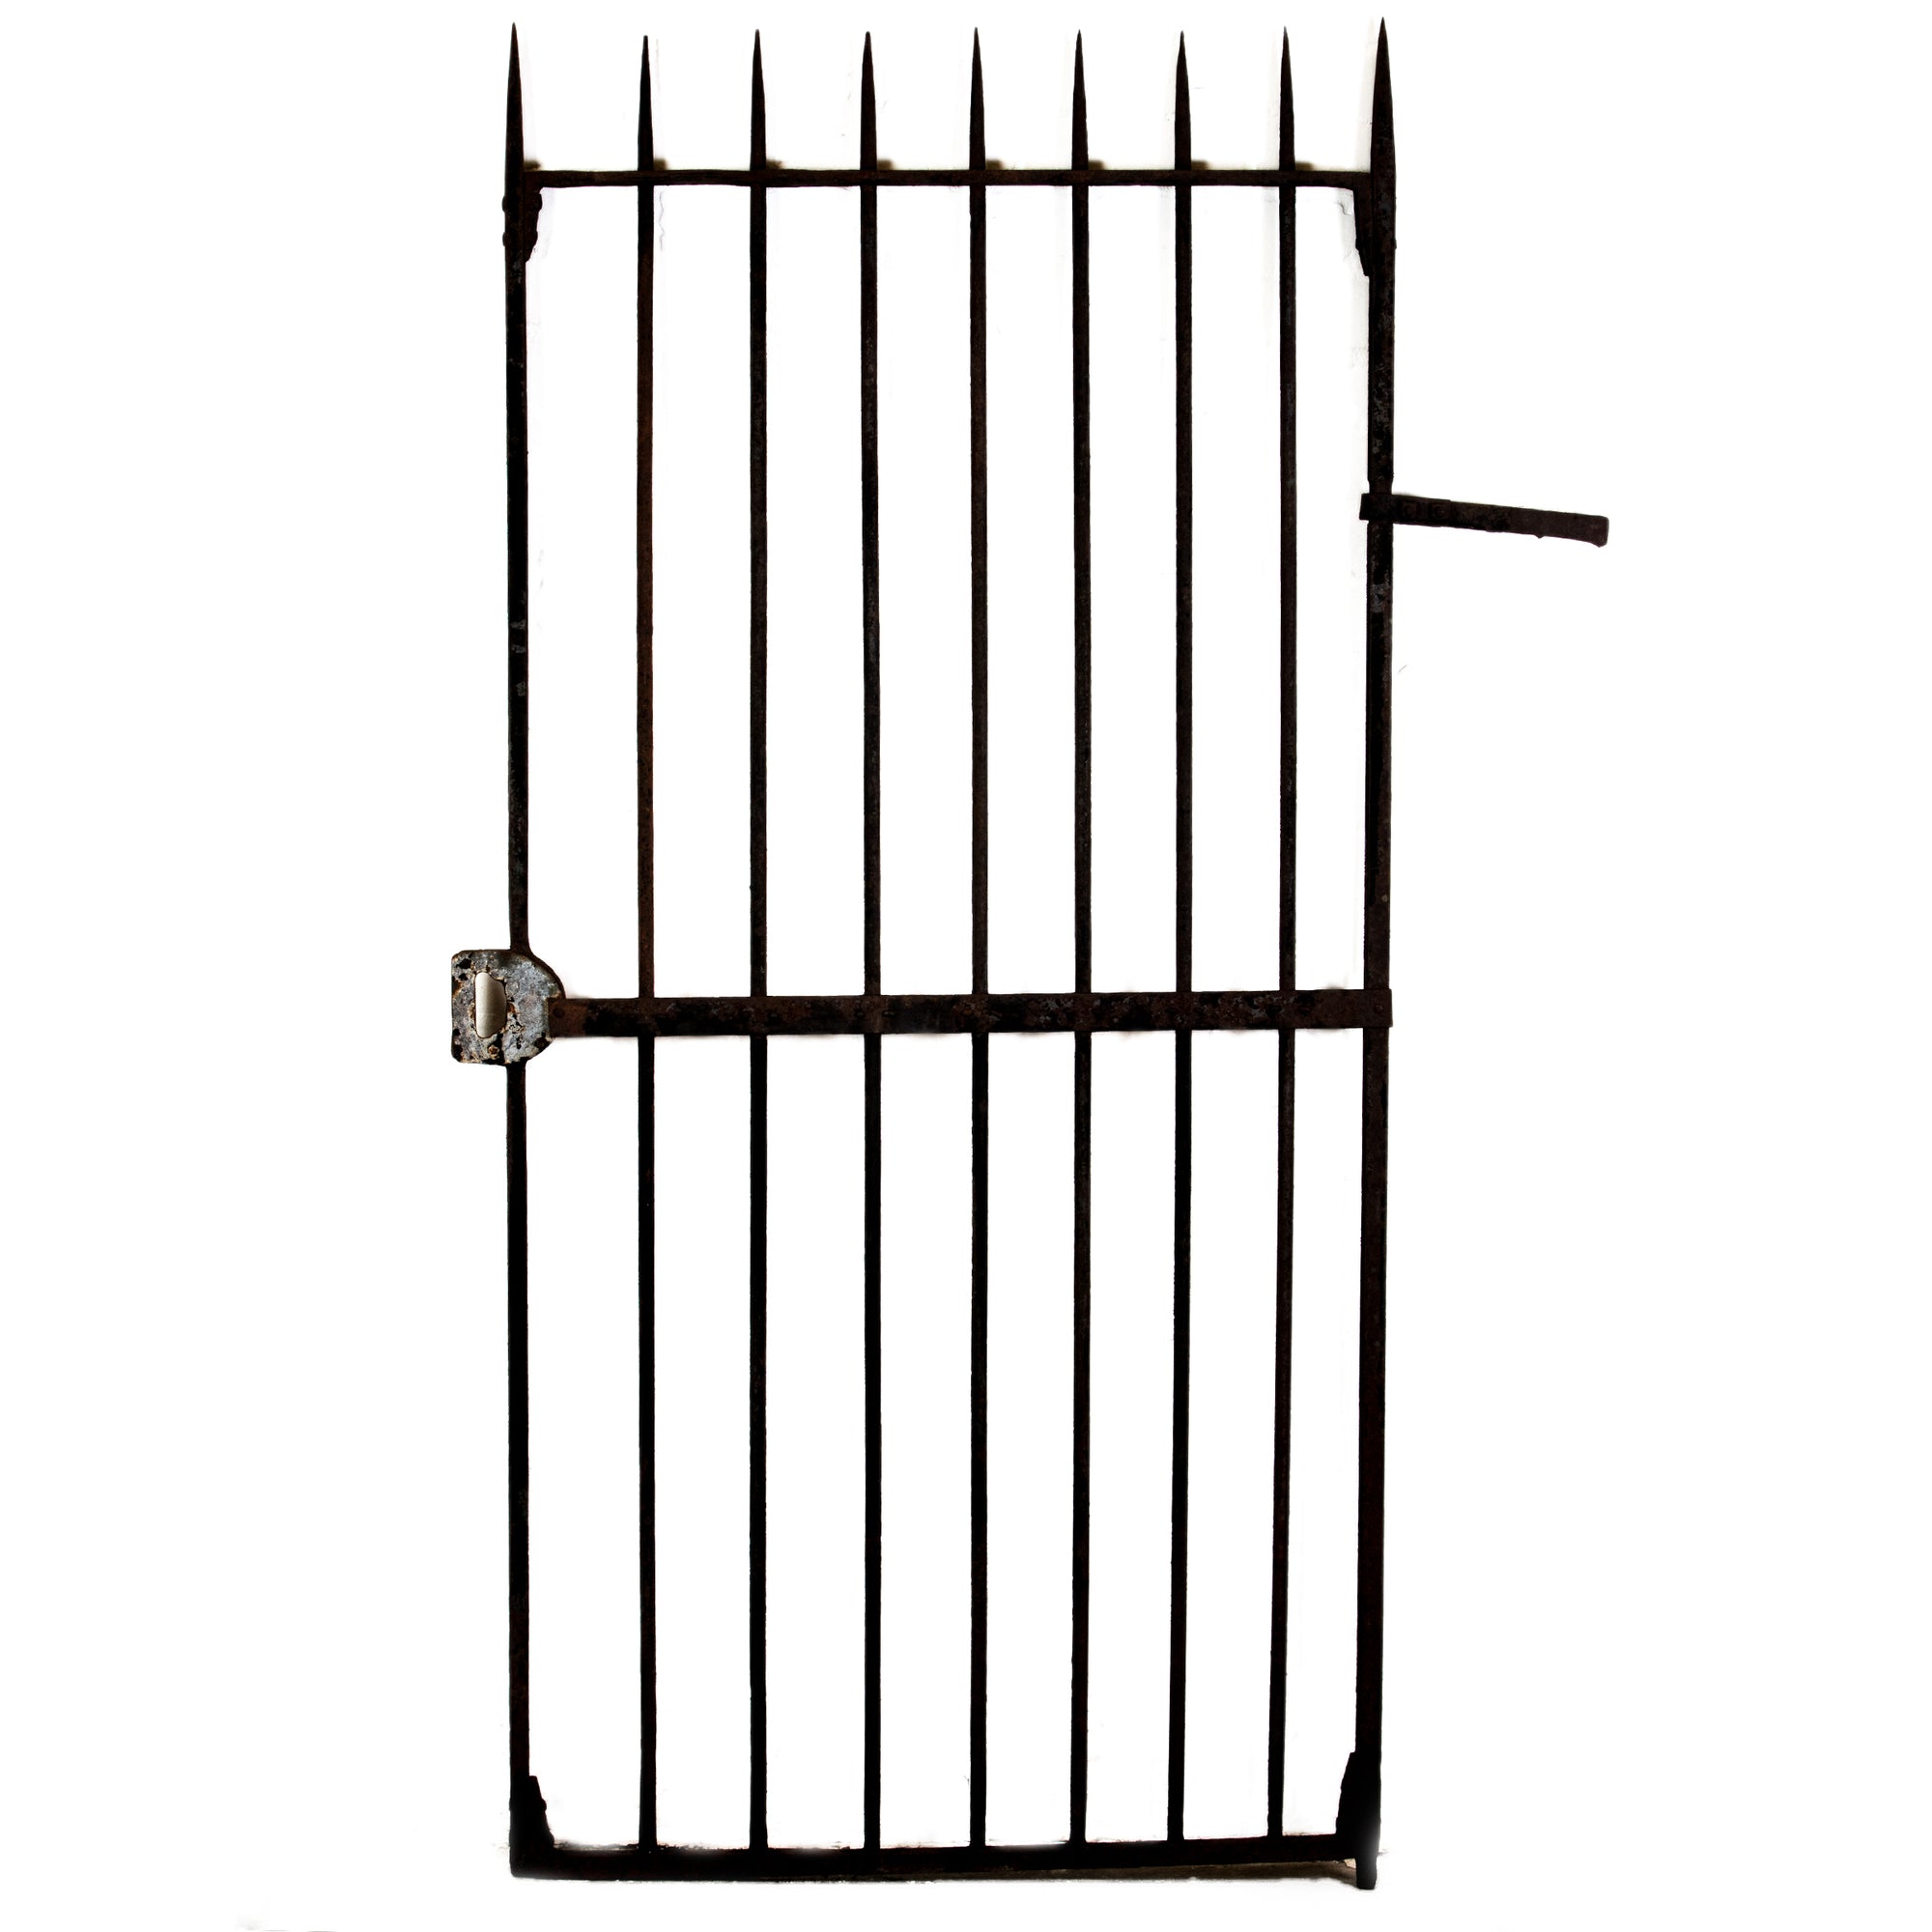 Antique Wrought Iron Gate with Spikes | The Architectural Forum